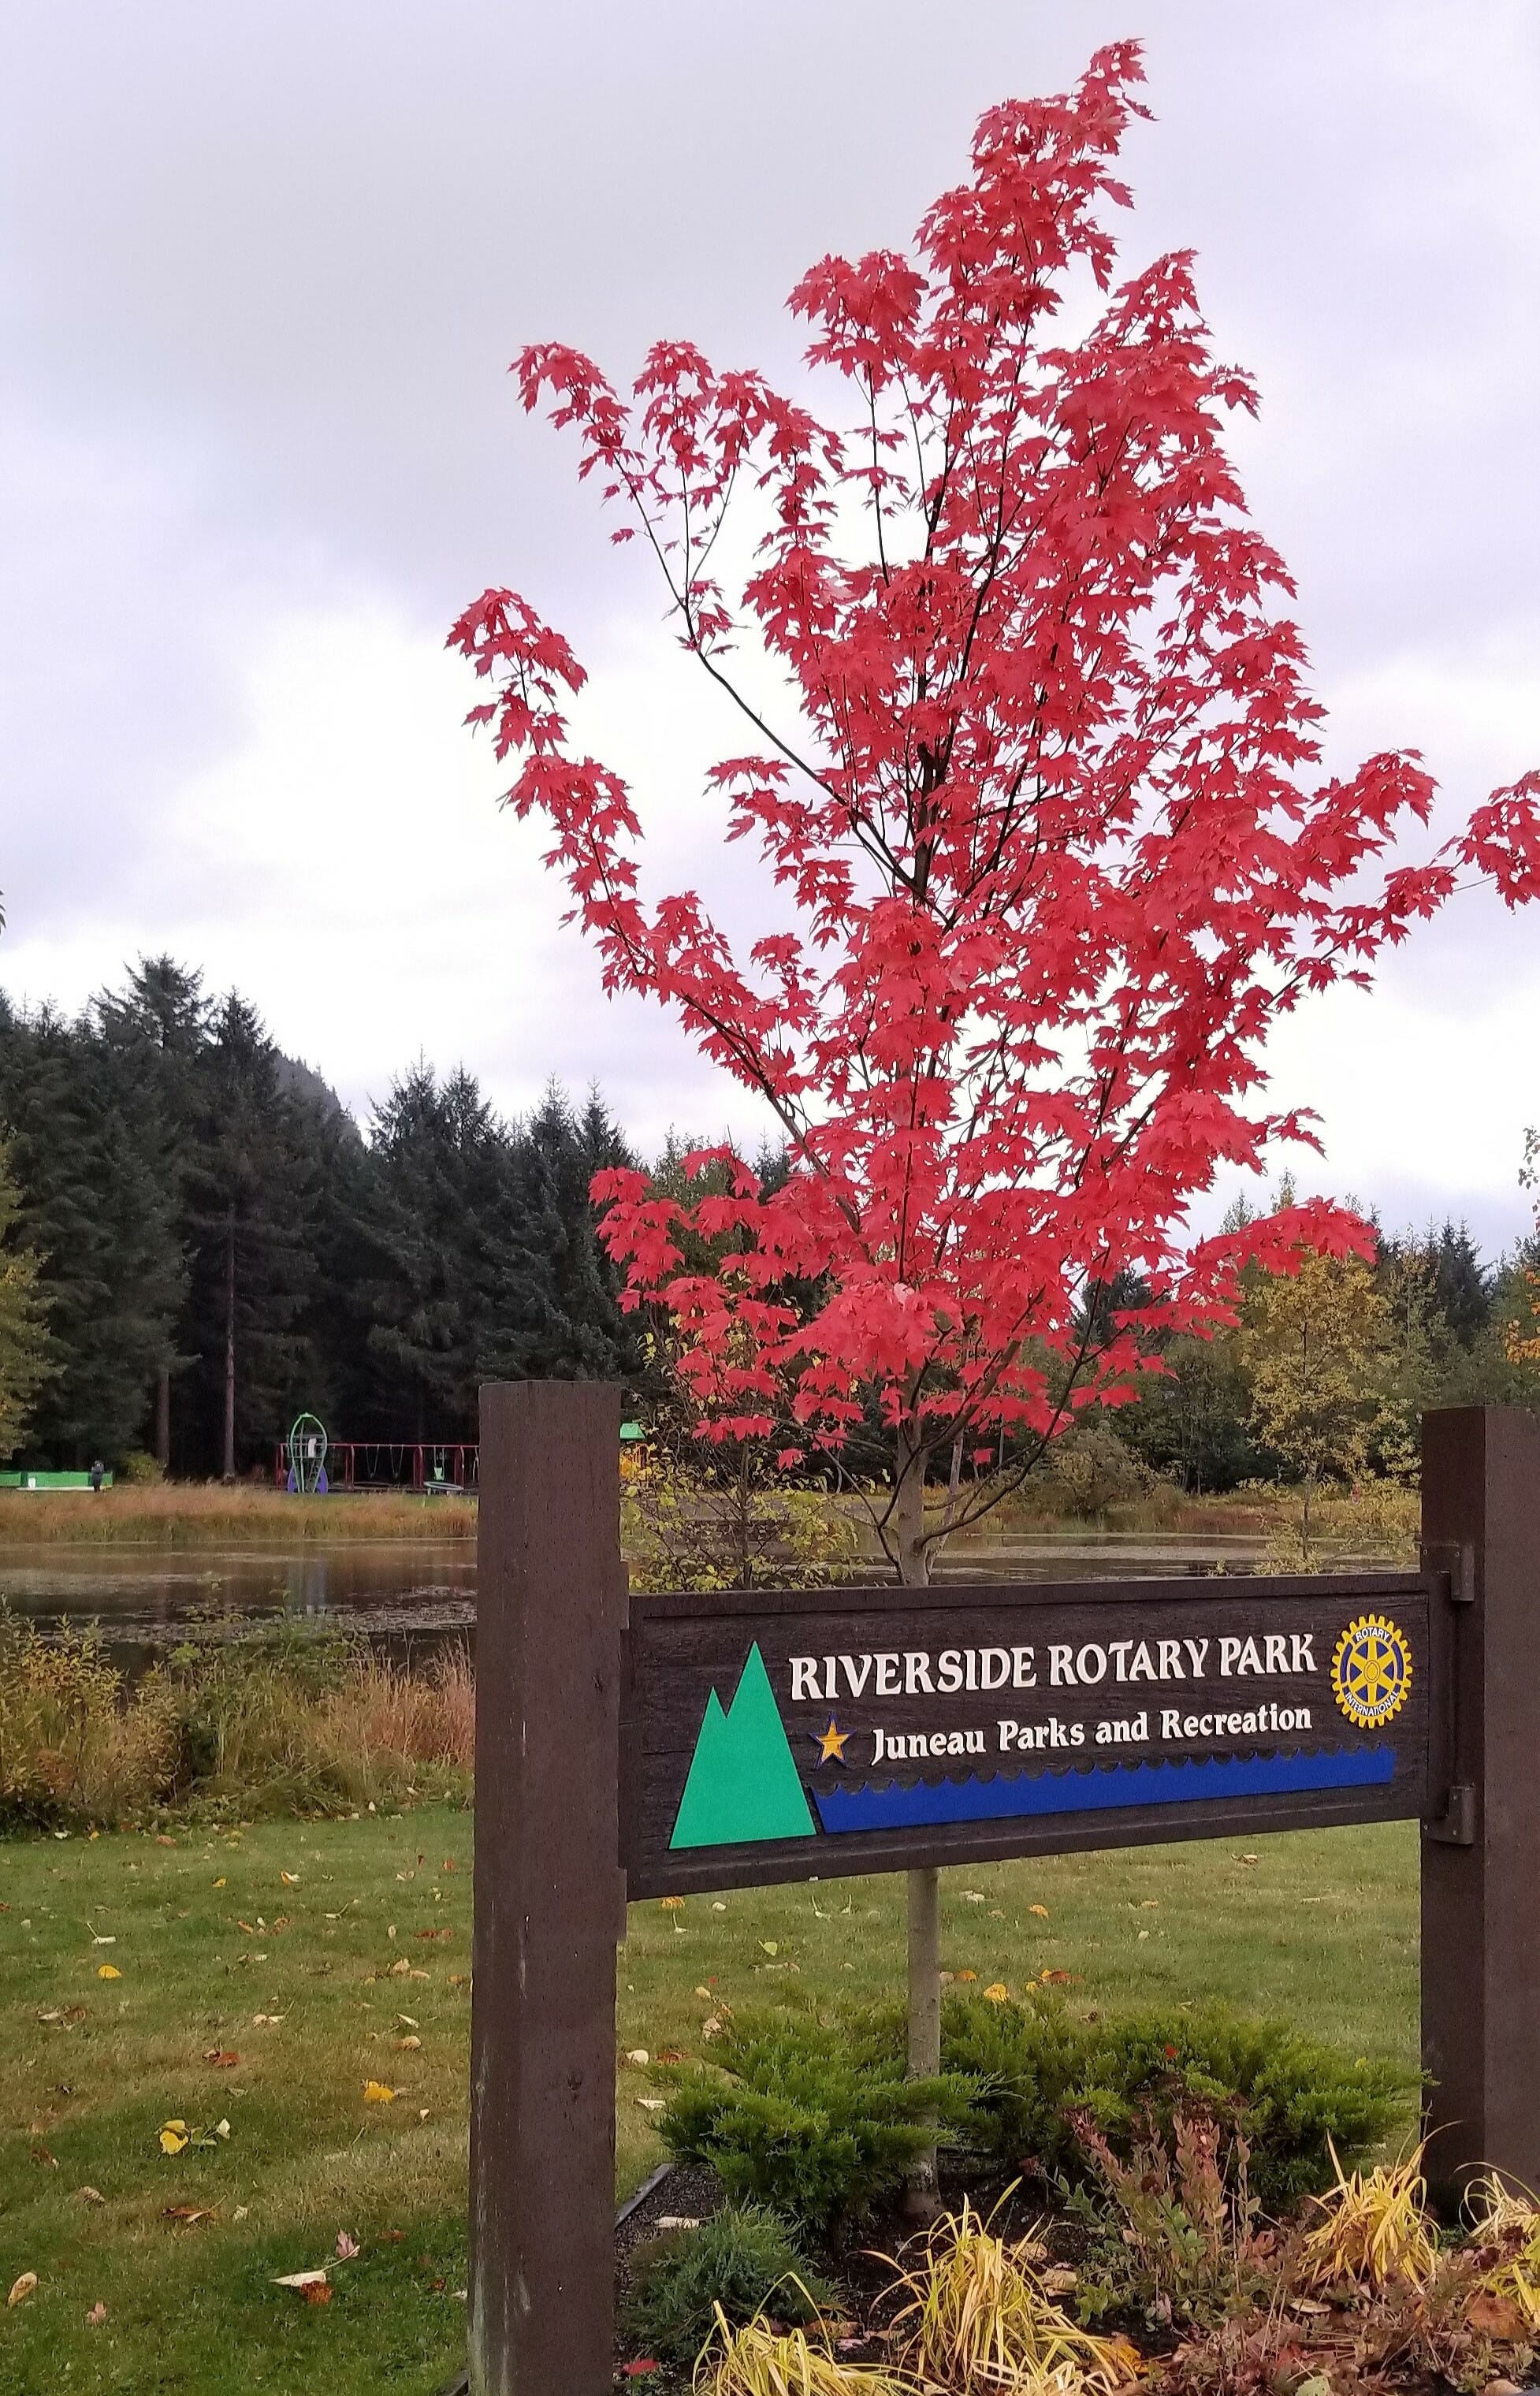 Riverside Rotary Park sign with a red leafed tree.